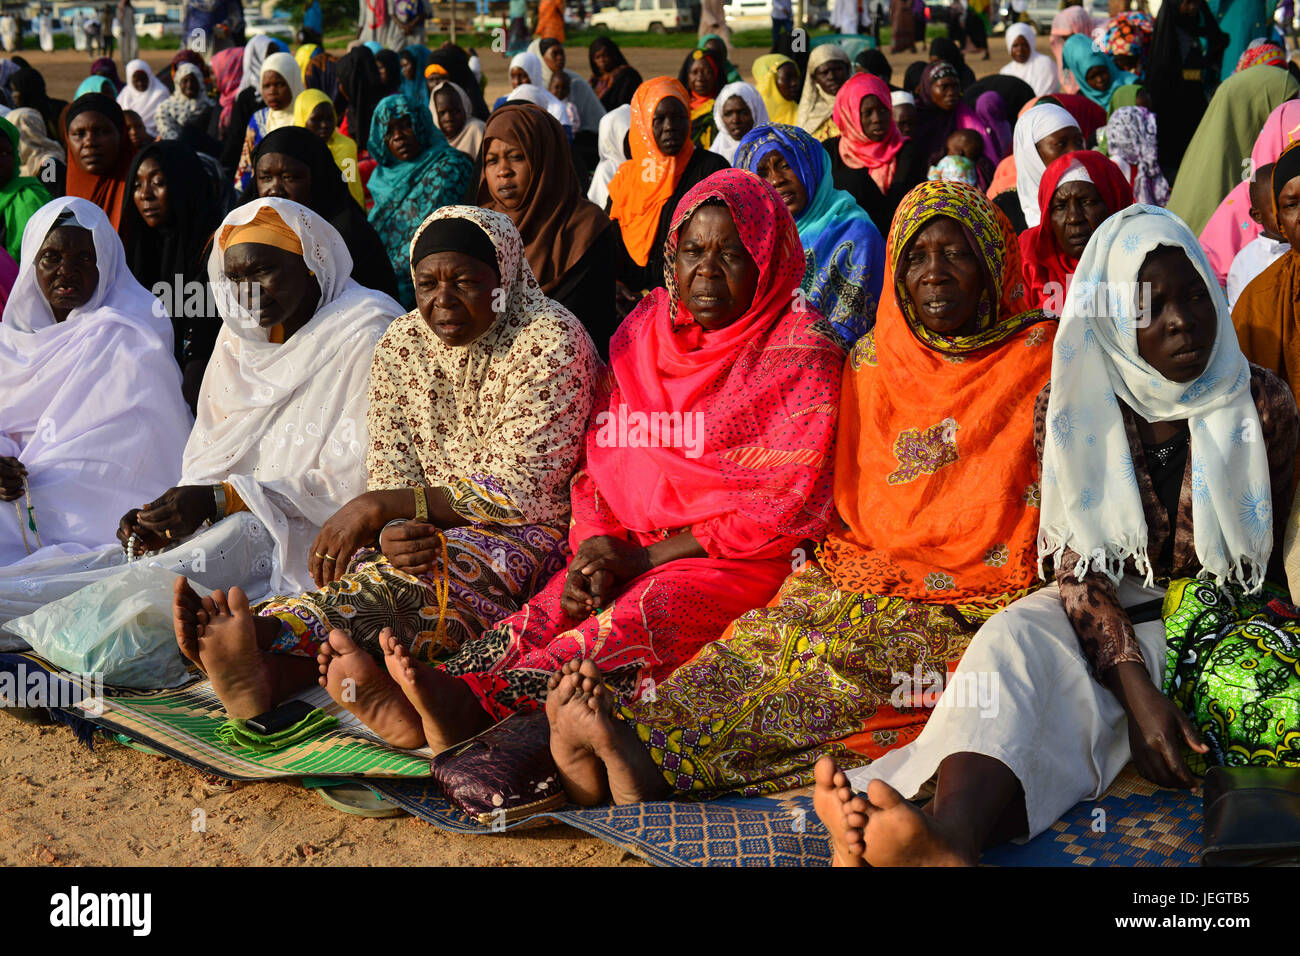 June 25, 2017 - Juba, Jubek, South Sudan - South Sudanese Muslim women pray in an open lot in the Malkei neighborhood of Juba, South Sudan, Sunday in the beginning of Eid al-Fatr, the celebration marking the end of the Muslim holy month of Ramadan. Roughly half the population of South Sudan is Muslim, a legacy of its long domination by the Arab-controlled northern Sudan, which ended in 2011, when South Sudan became the world's newest nation. The country has been in a state of civil war for the past three years, leaving millions of civilians displaced and near famine. (Credit Image: © Miguel Ju Stock Photo